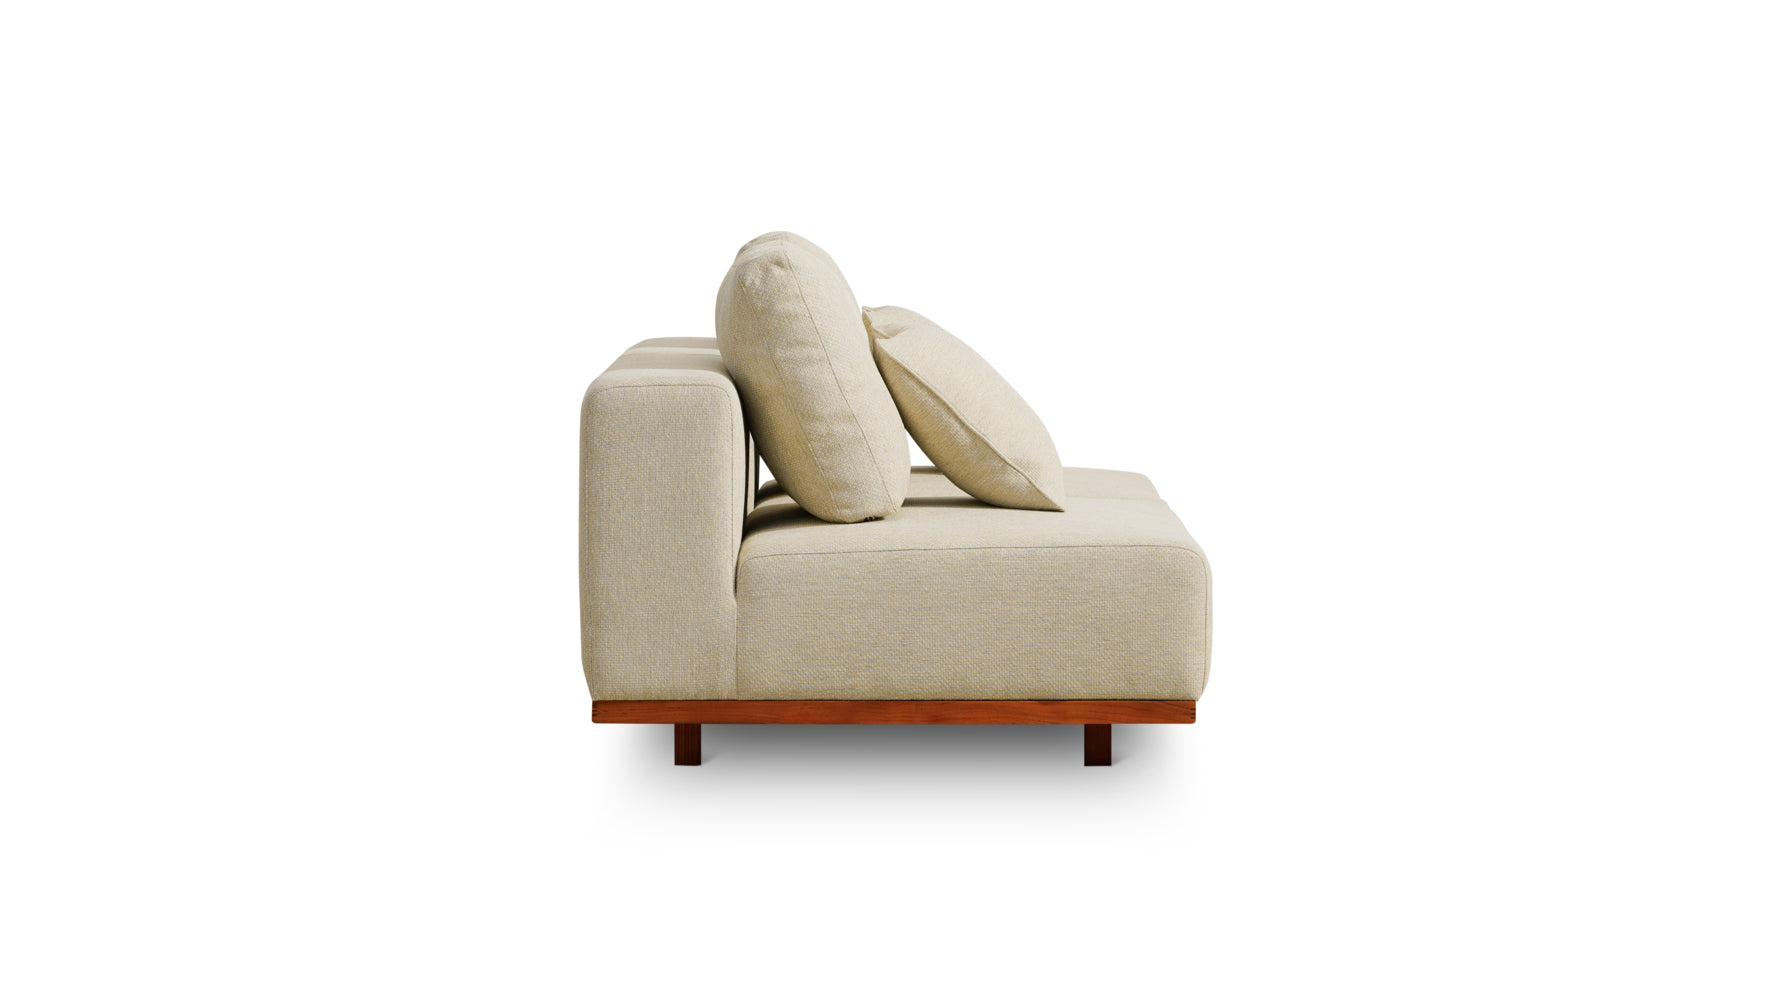 Sunny Days Outdoor Sofa, 2 Seater, Sandy - Image 3